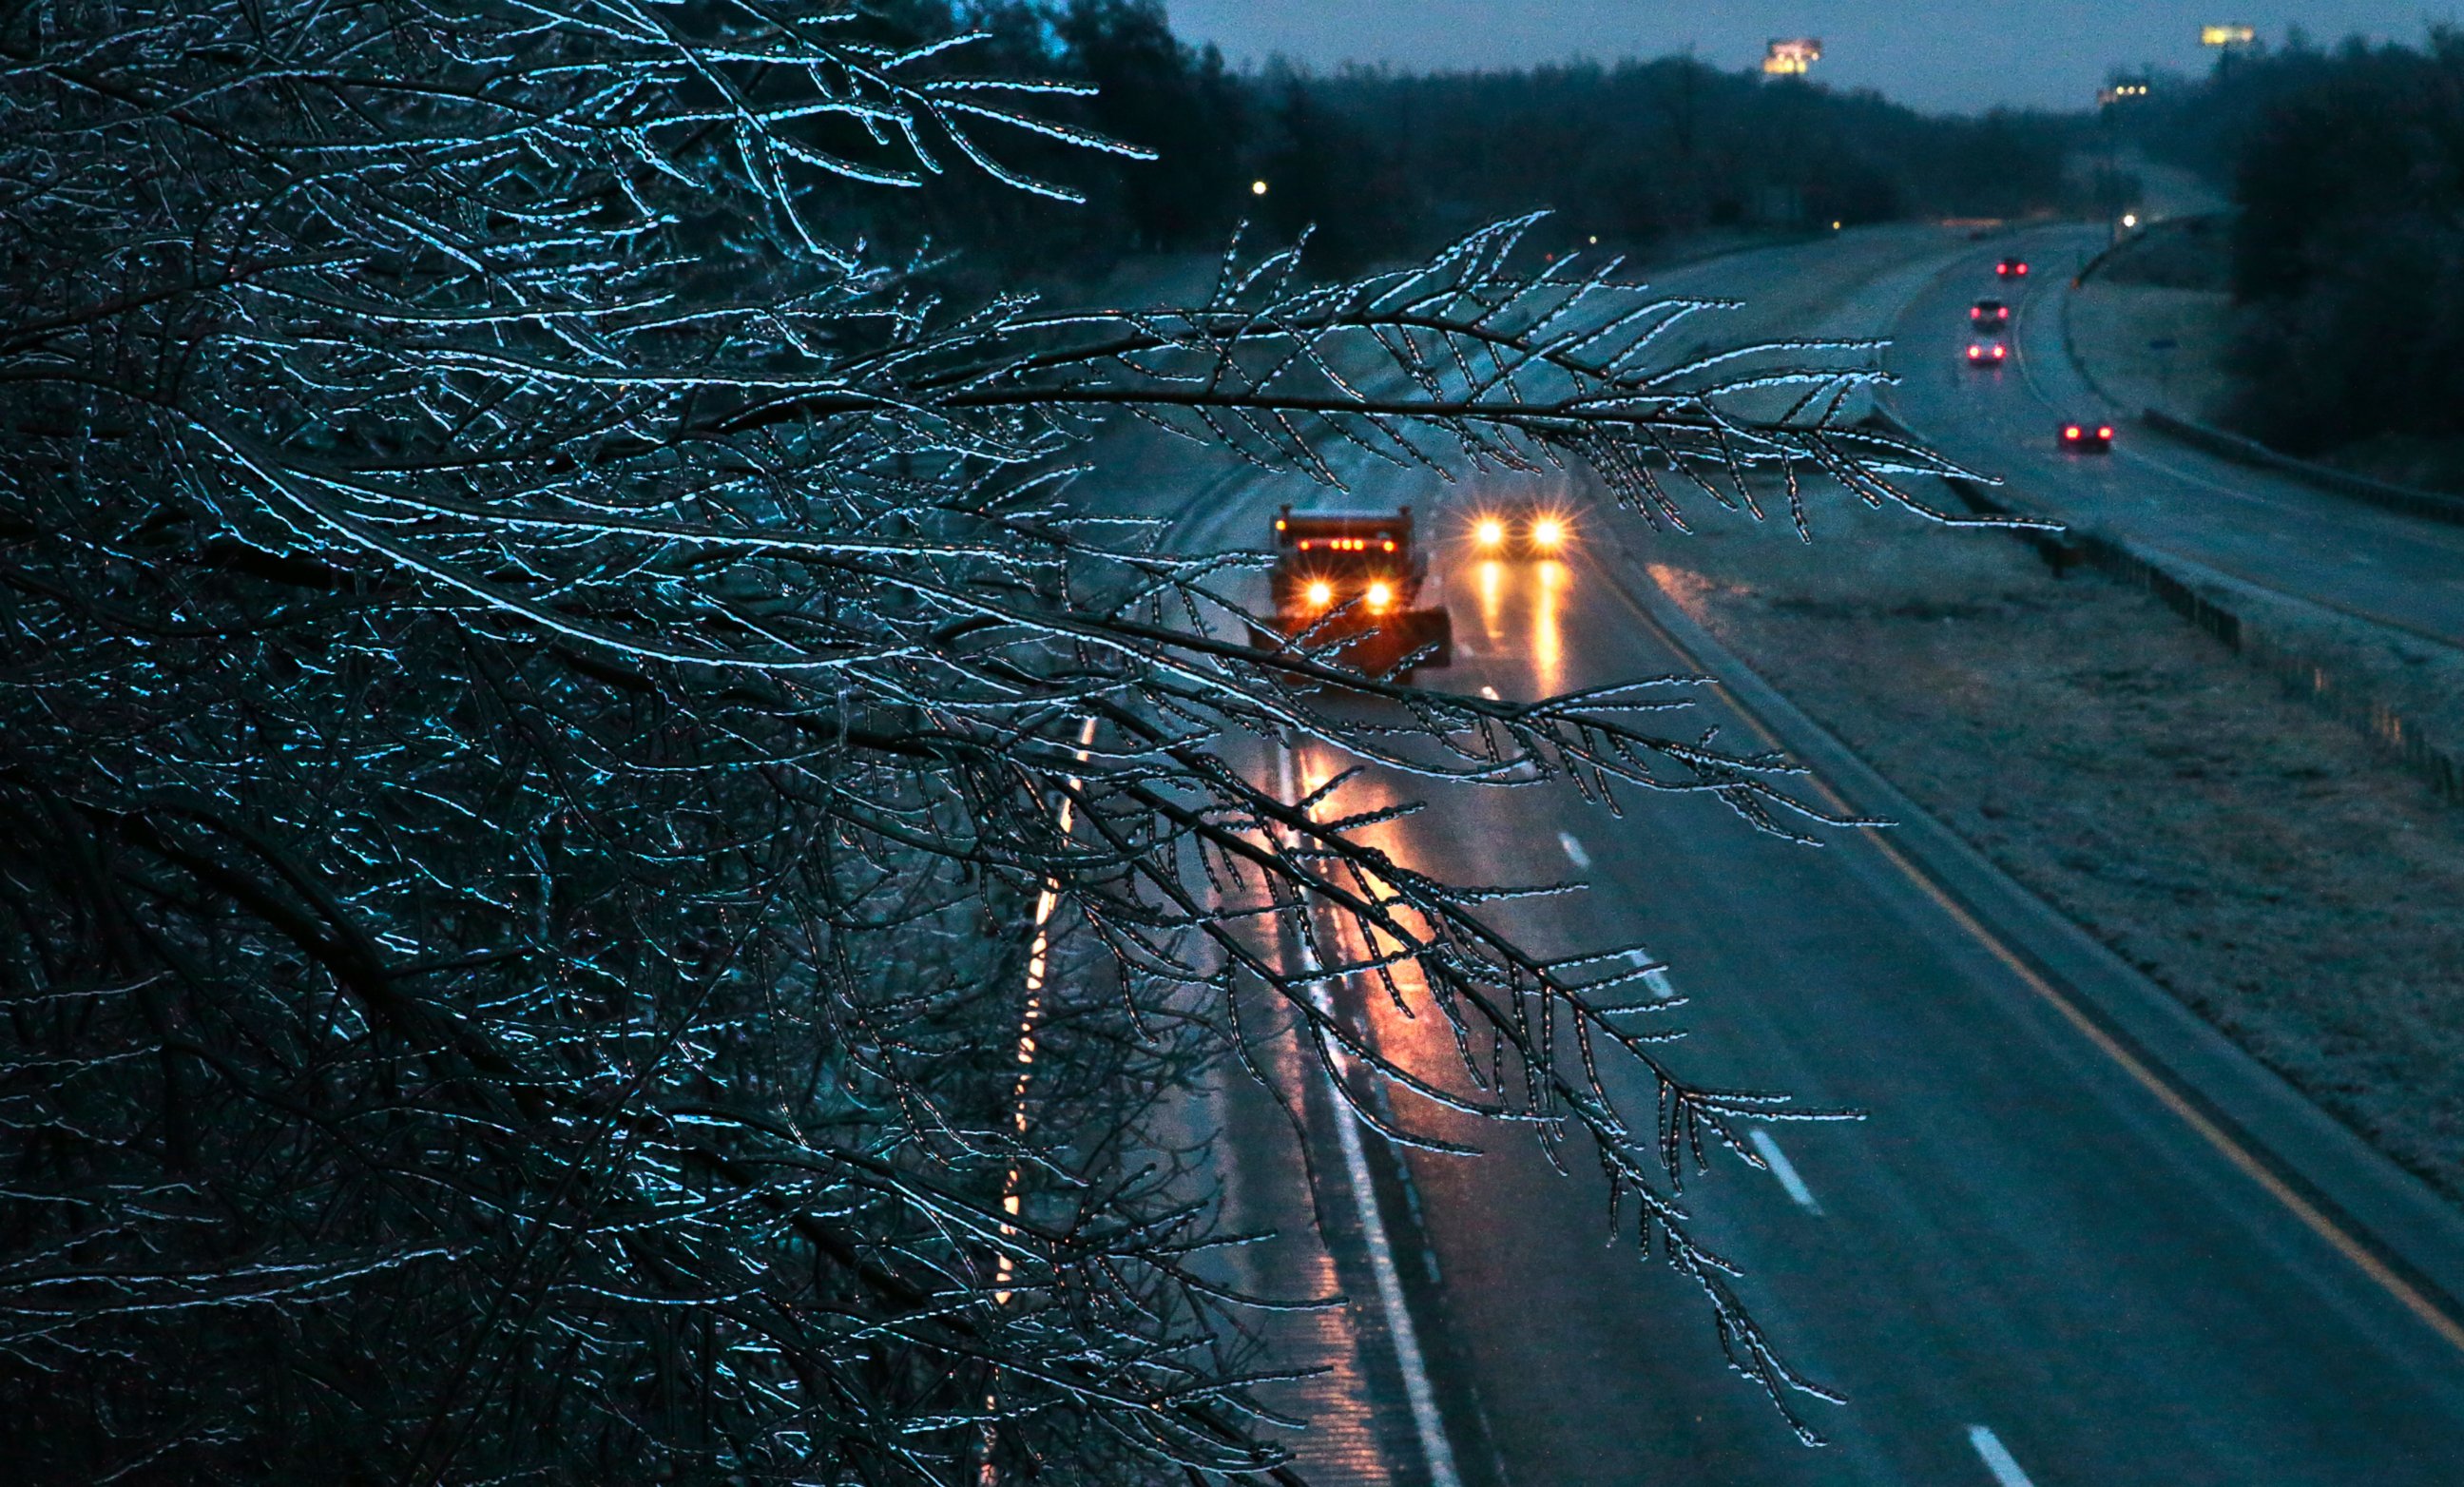 PHOTO: A Missouri Department of Transportation salt truck spreads ice melt on Interstate 55 as coated tree branches sway overhead as seen from the Main Street bridge, Jan. 13, 2017 in Festus, Missouri. 